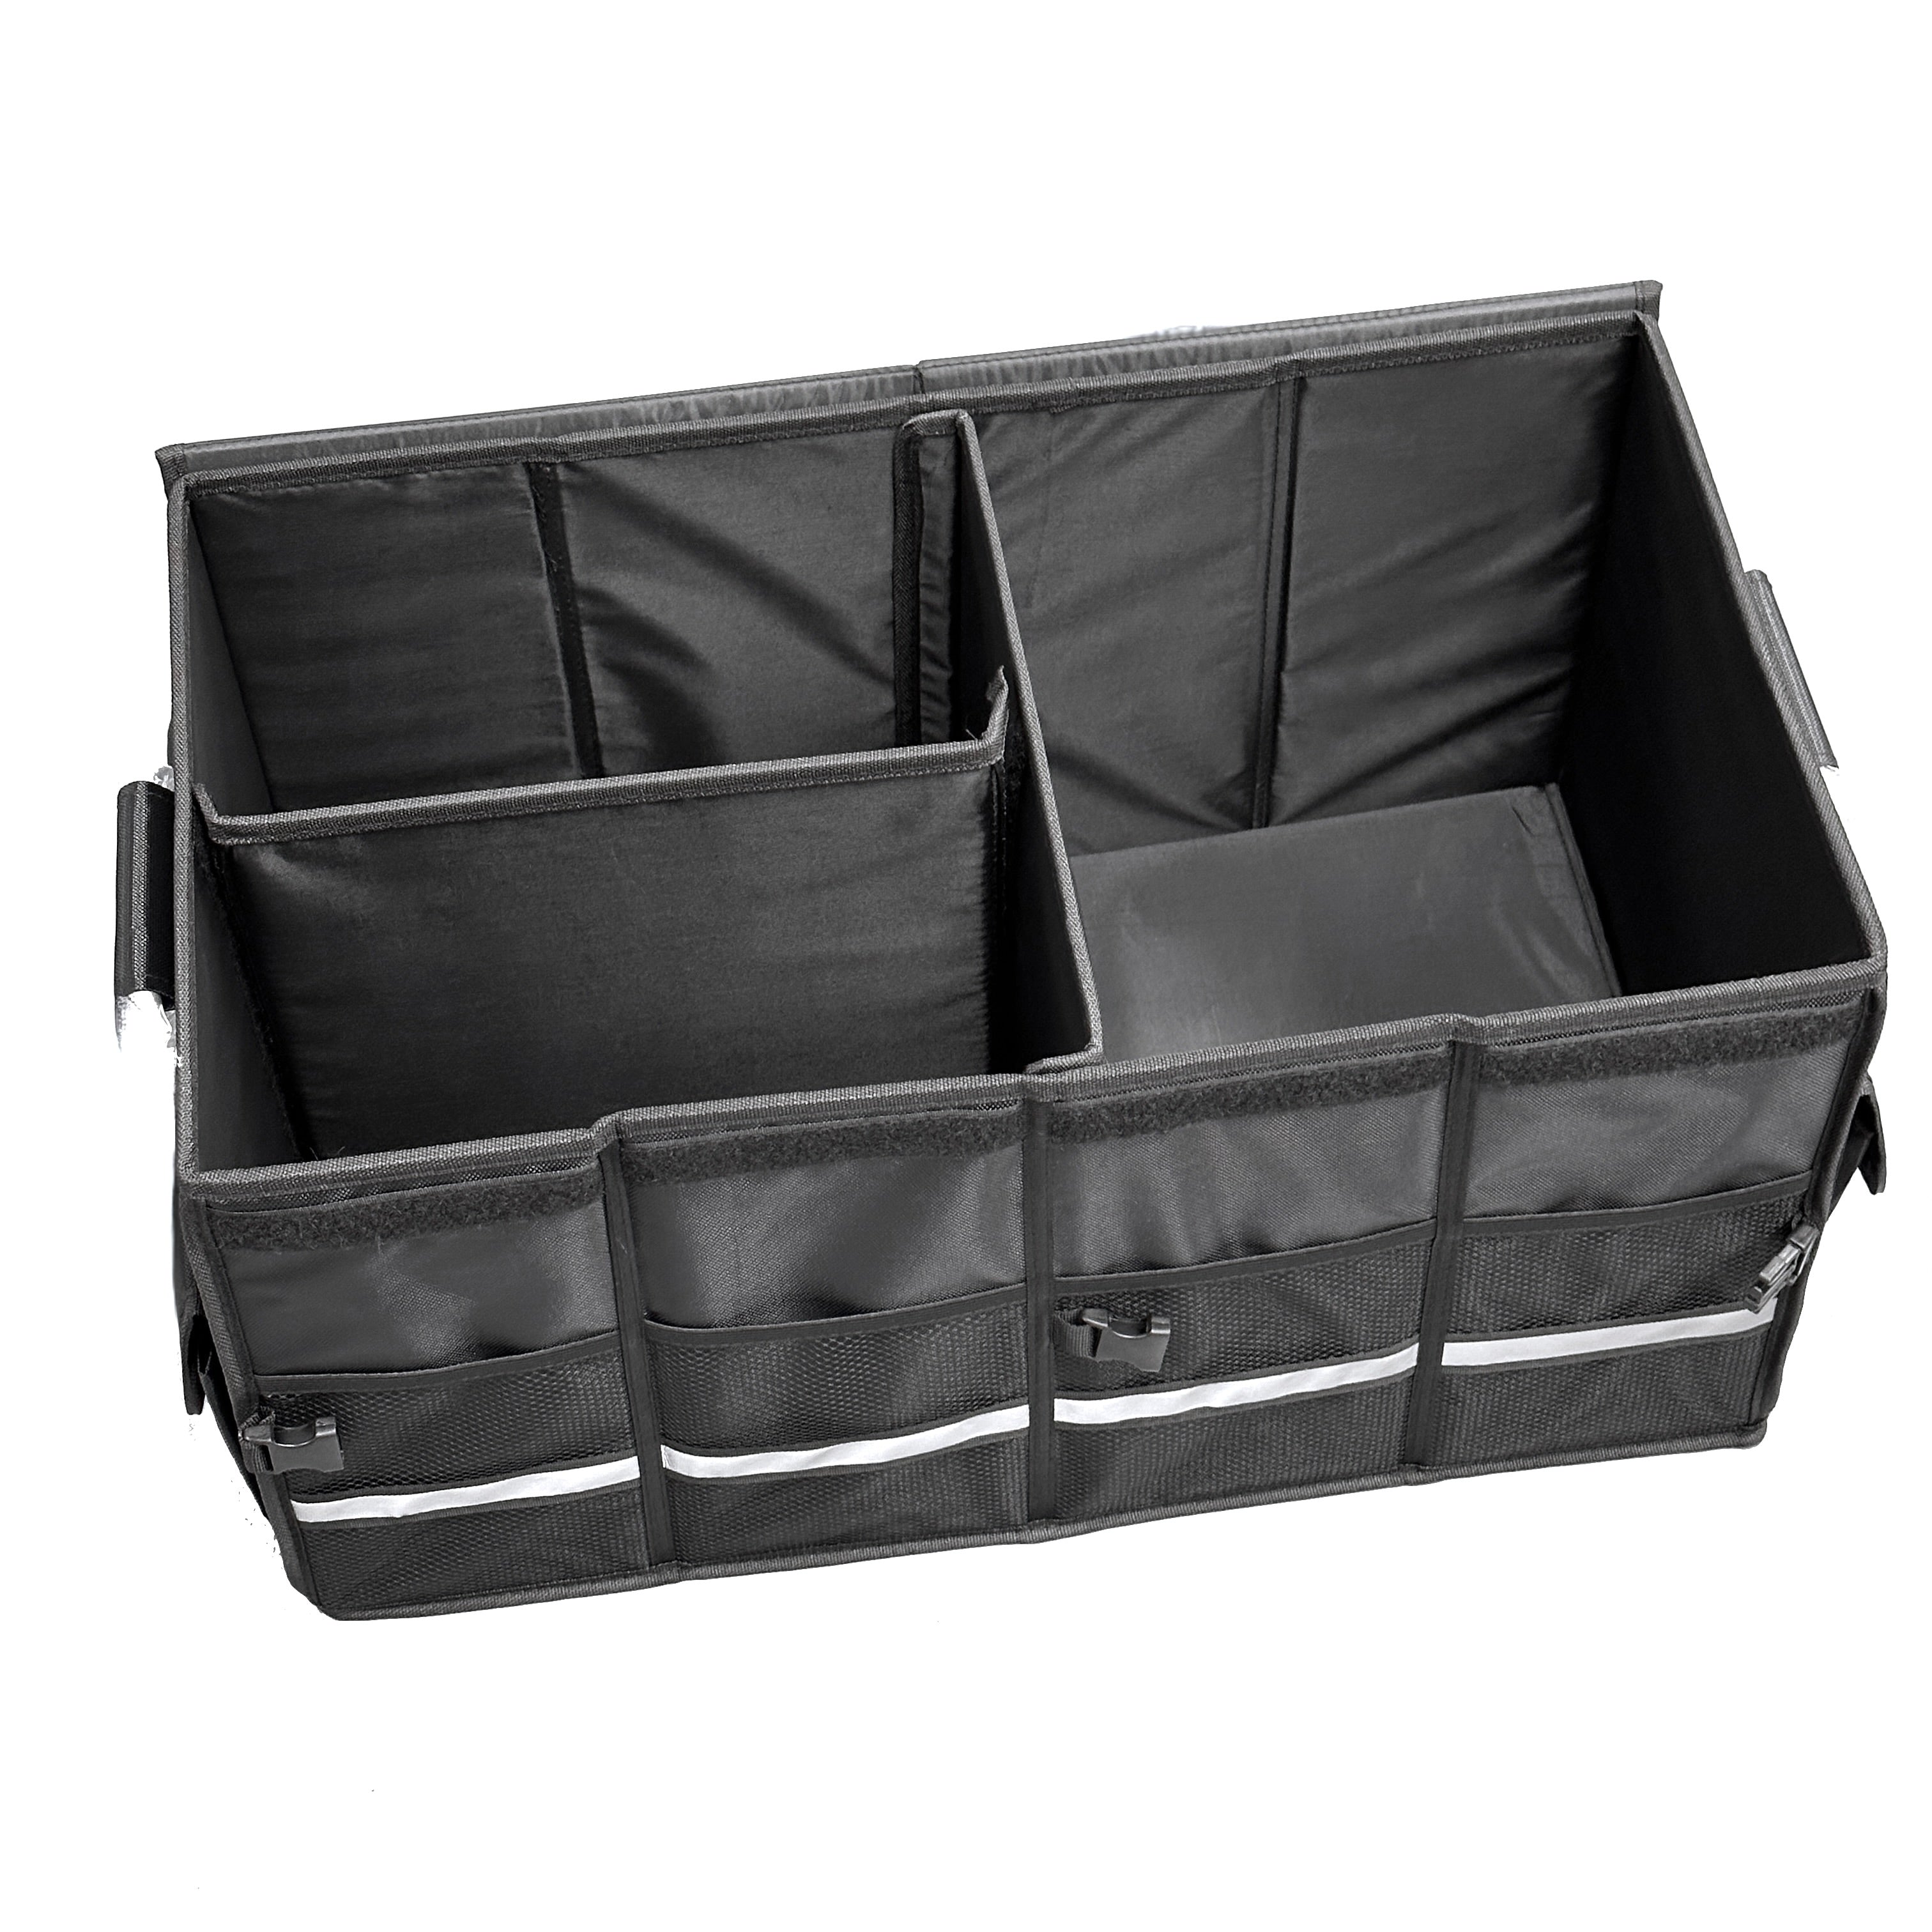 Model S3XY Collapsible Trunk Organizer - Fits Frunks, Trunks, & Sub Tr